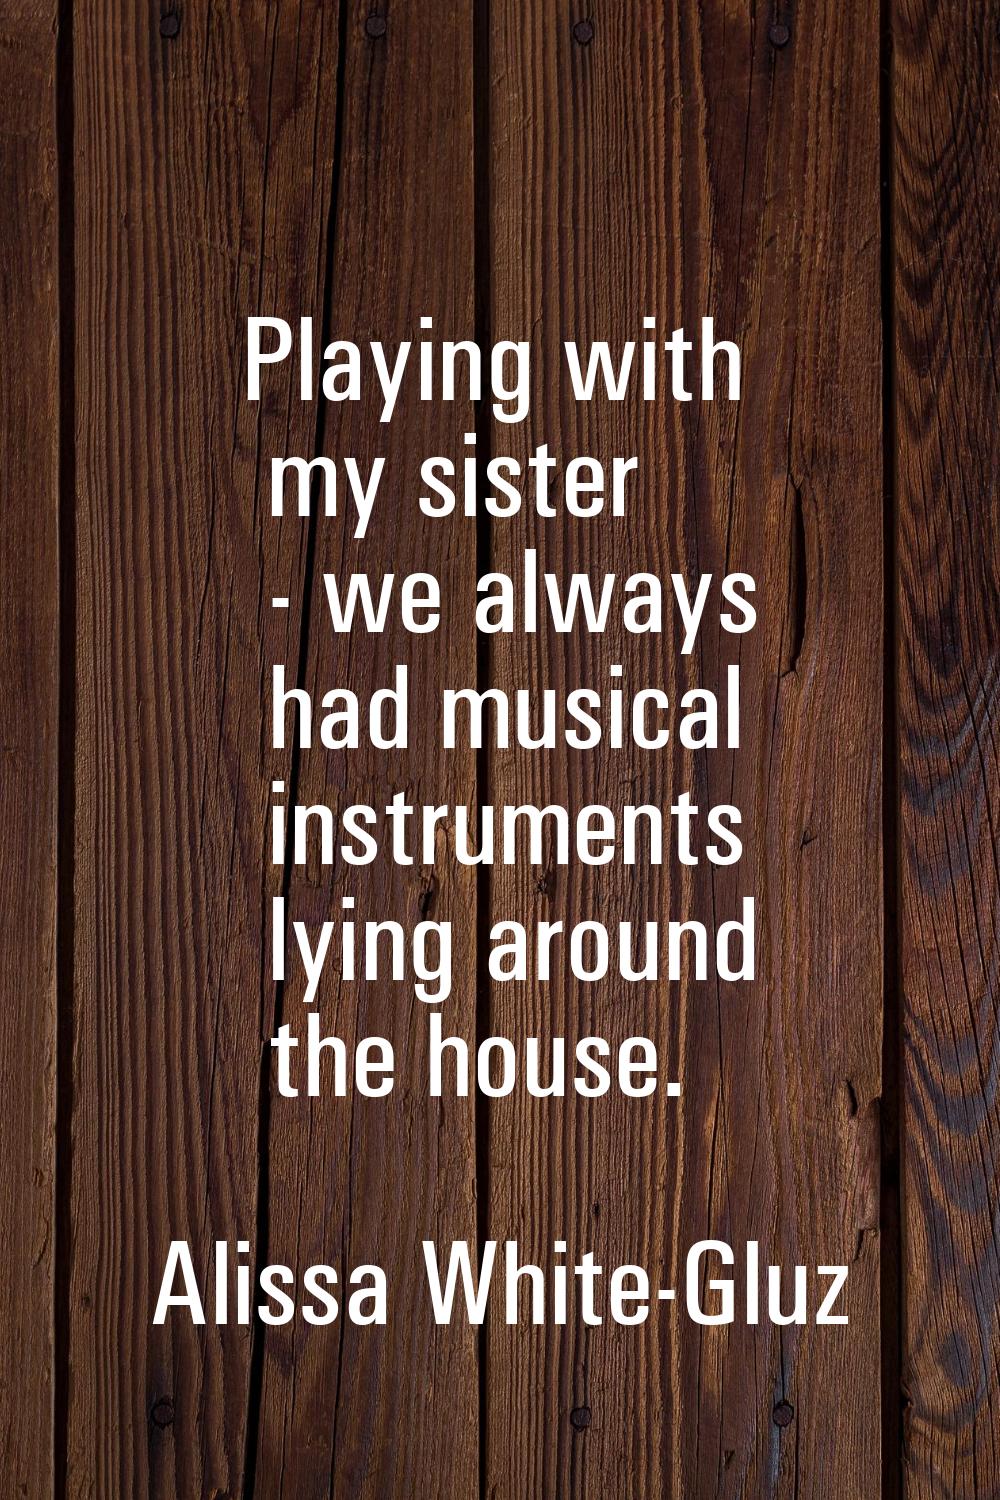 Playing with my sister - we always had musical instruments lying around the house.